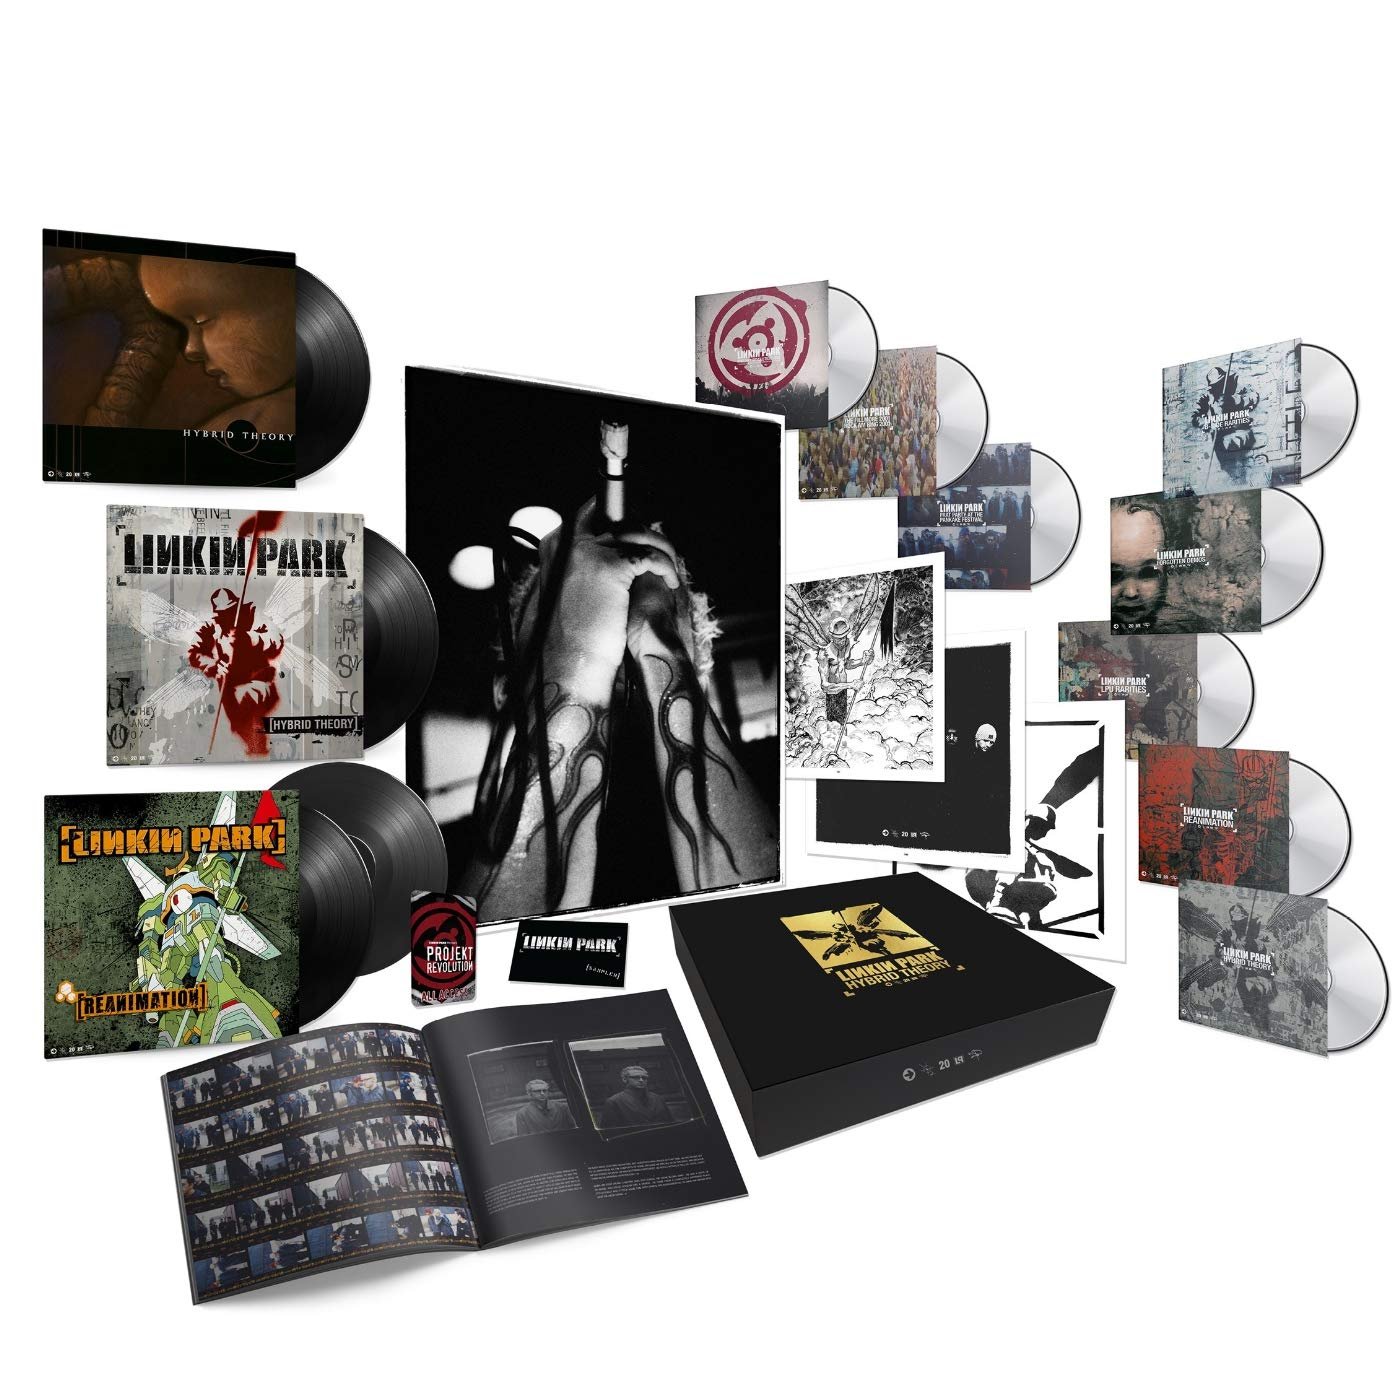 Ign Deals Preorder Linkin Park S Hybrid Theory th Anniversary Vinyl Includes Hybrid Theory Lp Reanimation On 2 Lps B Side Rarities Lp Hybrid Theory Ep 5 Cds 3 Dvds 80 Page Book